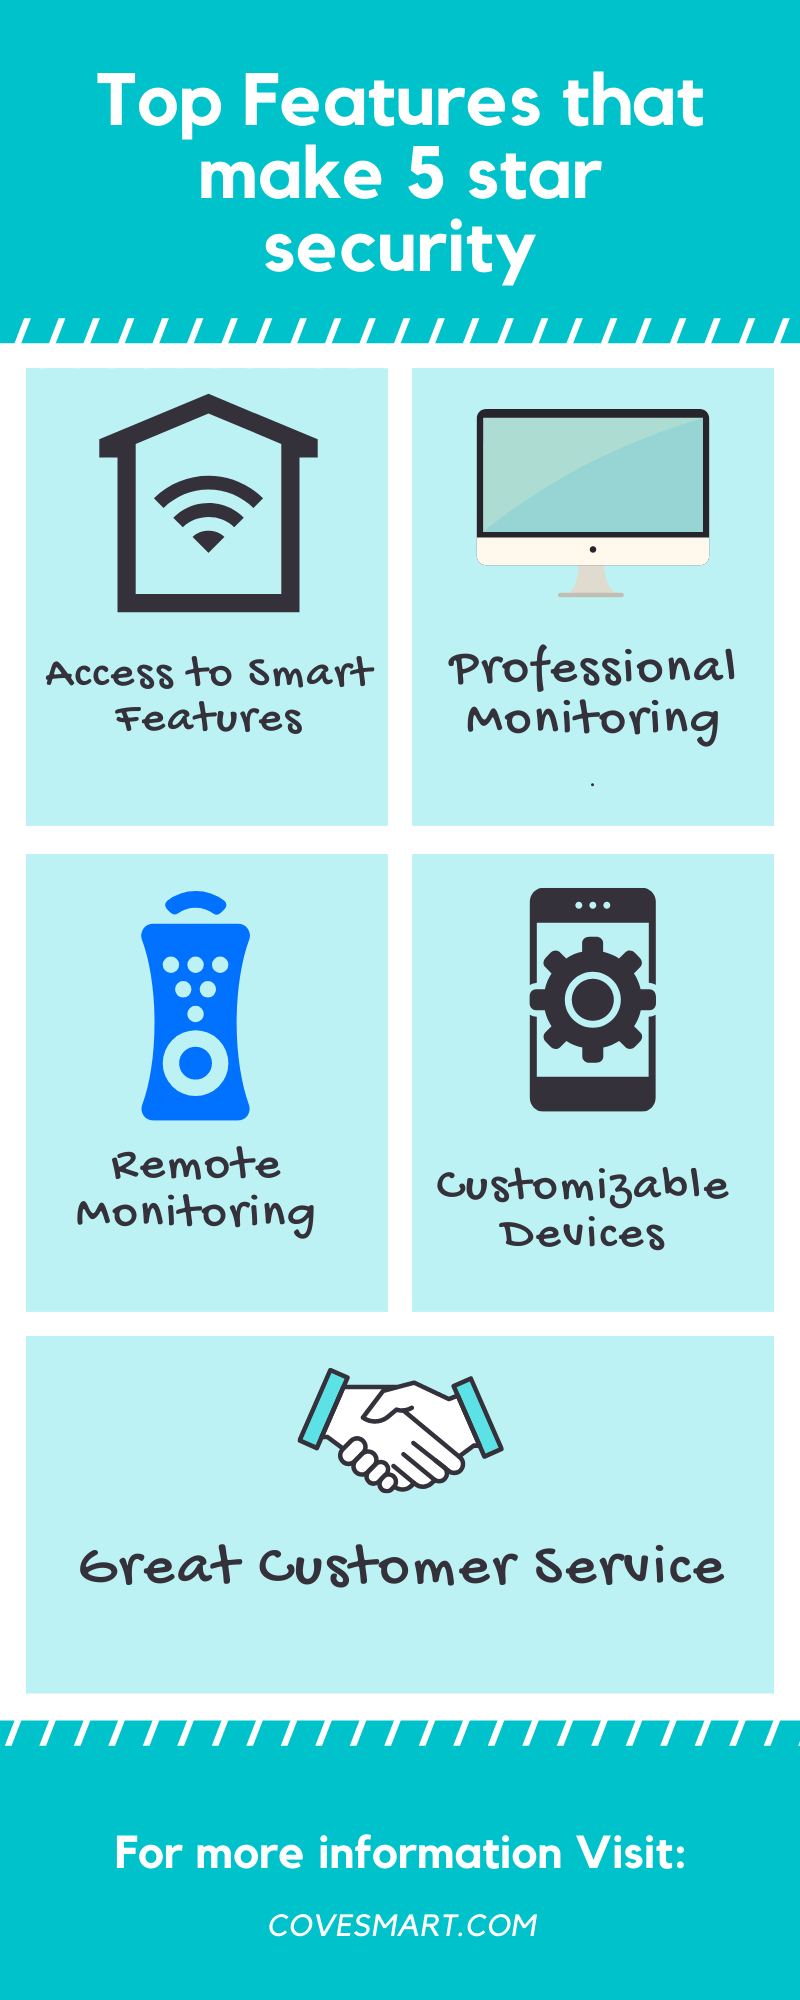 5 Star Security Infographic. Smart Features. professional and remote Monitoring. Customizable Devices. Great Customer Service